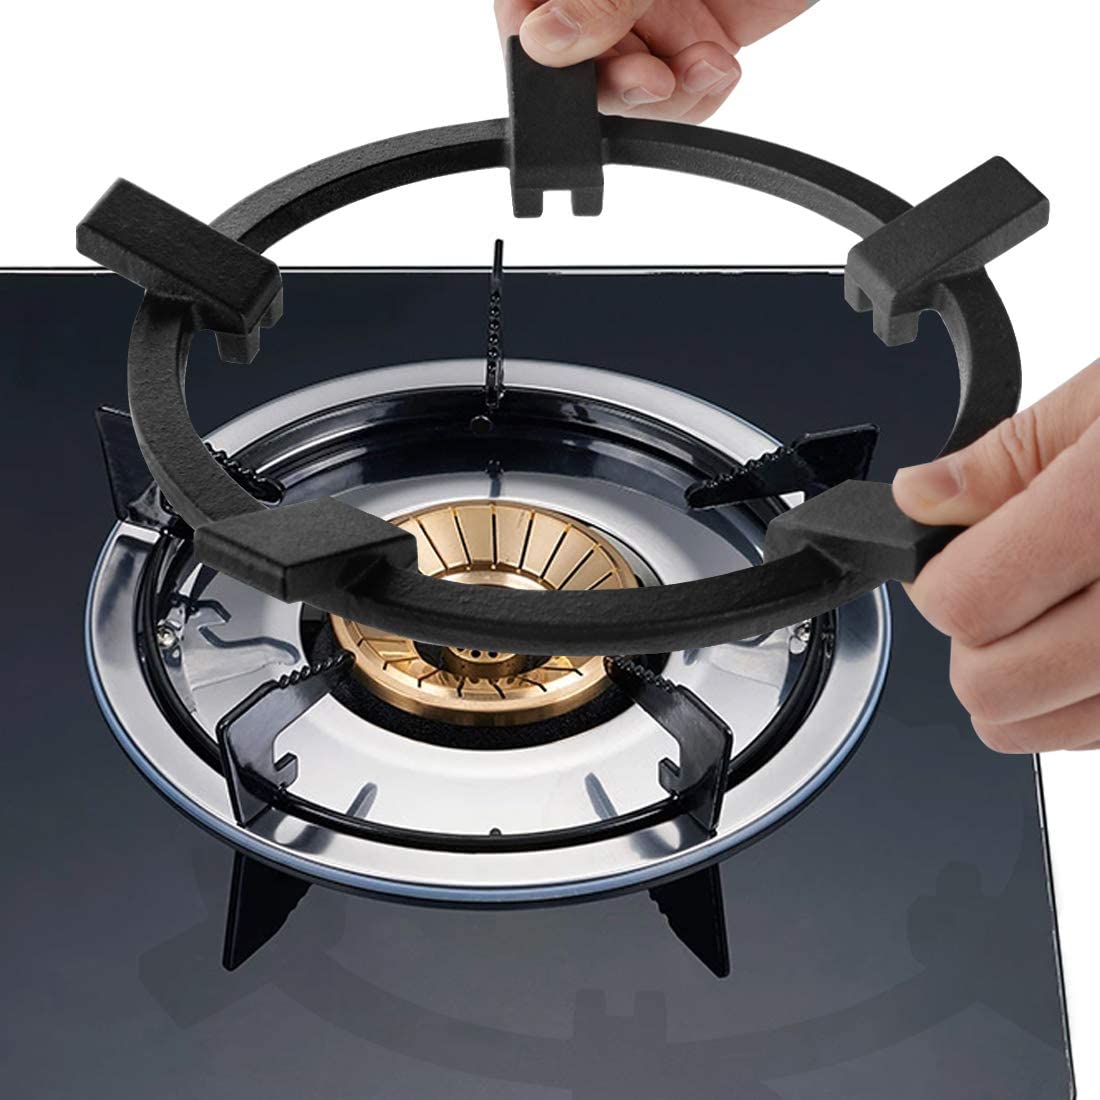 Linkidea Wok Ring for GAS Stove 5 Claw Non-Slip Black Cast Iron Wok Support Ring for Kitchen Cooktop Range Pan Holder Stand Stove Rack for GAS Hob